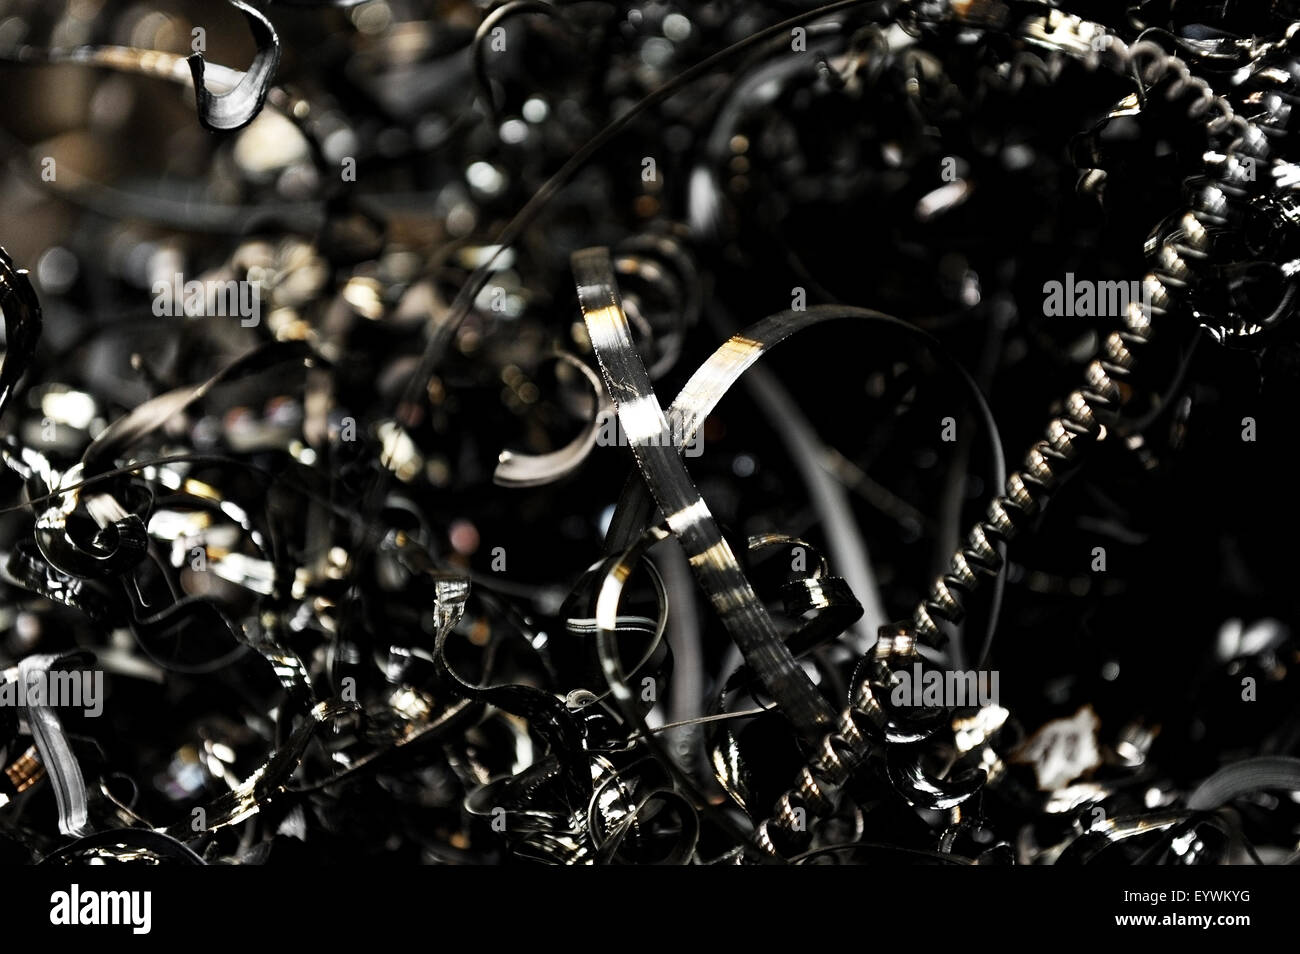 Industrial shot of scrap metal shavings removed by a cutting tool Stock Photo